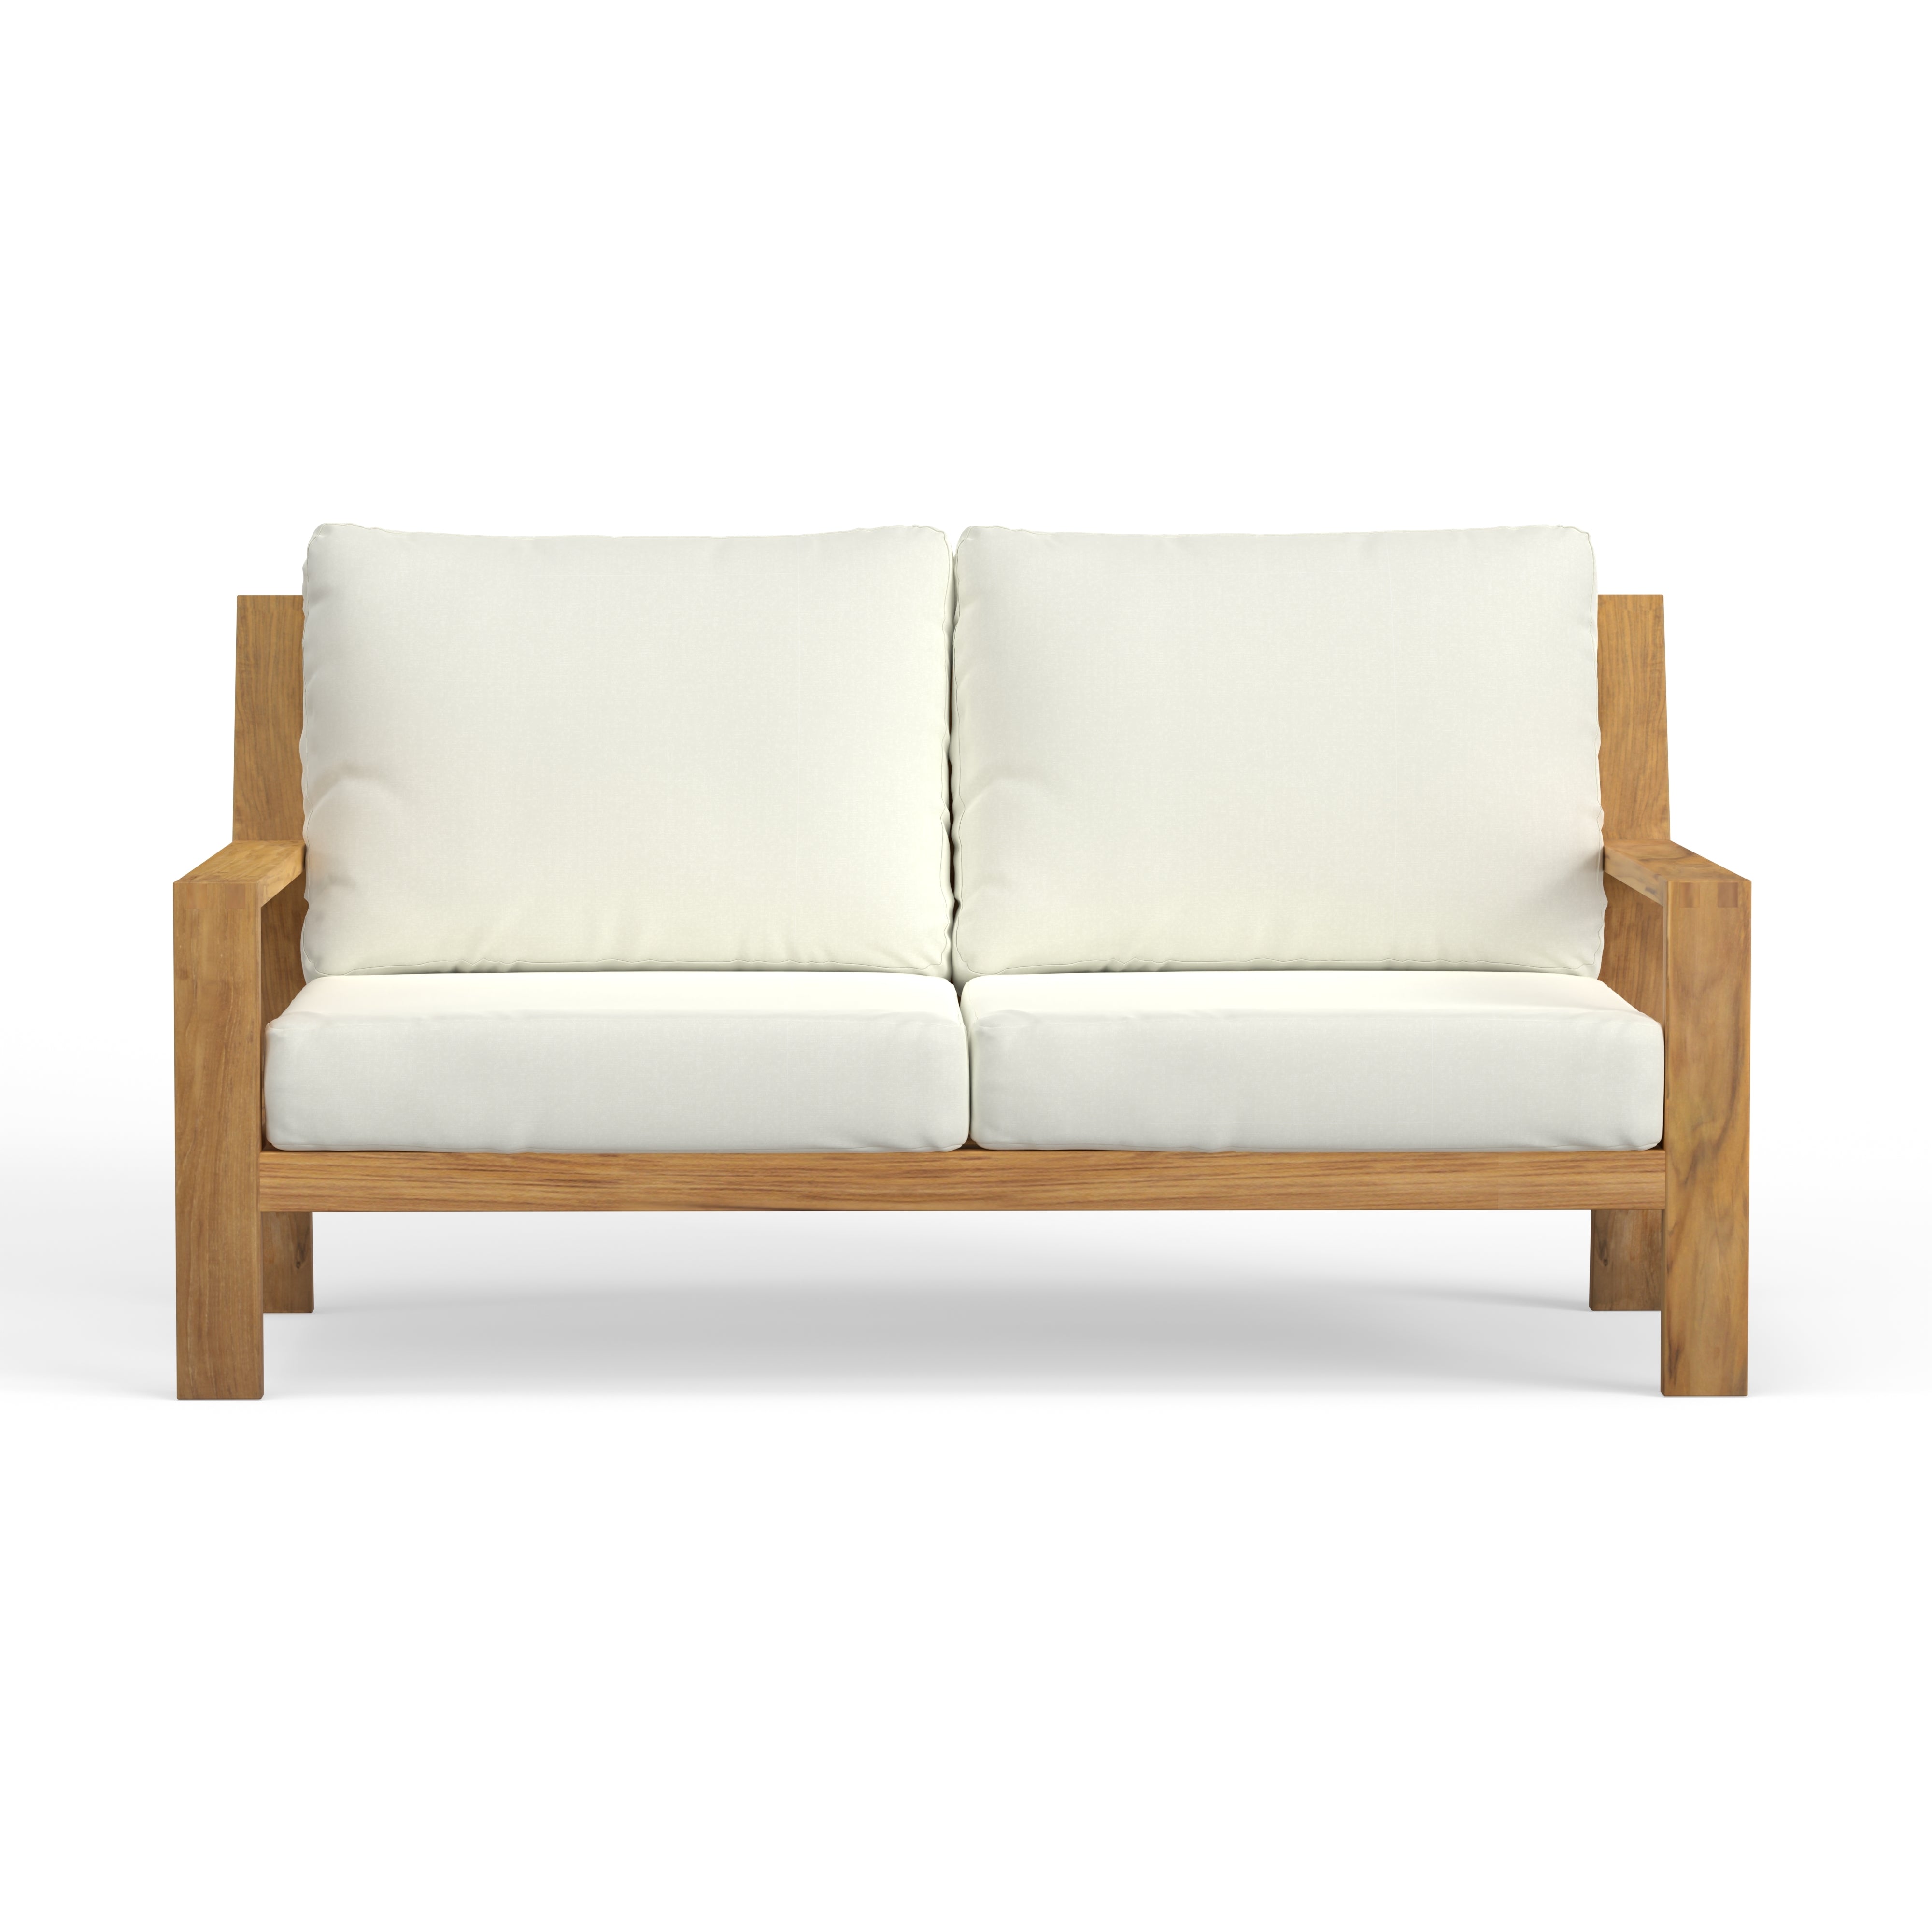 Harbor Classic Luxury Outdoor All Teak Wood Loveseat For Two With The Most Comfortable Sunbrella Cushions In Any Color